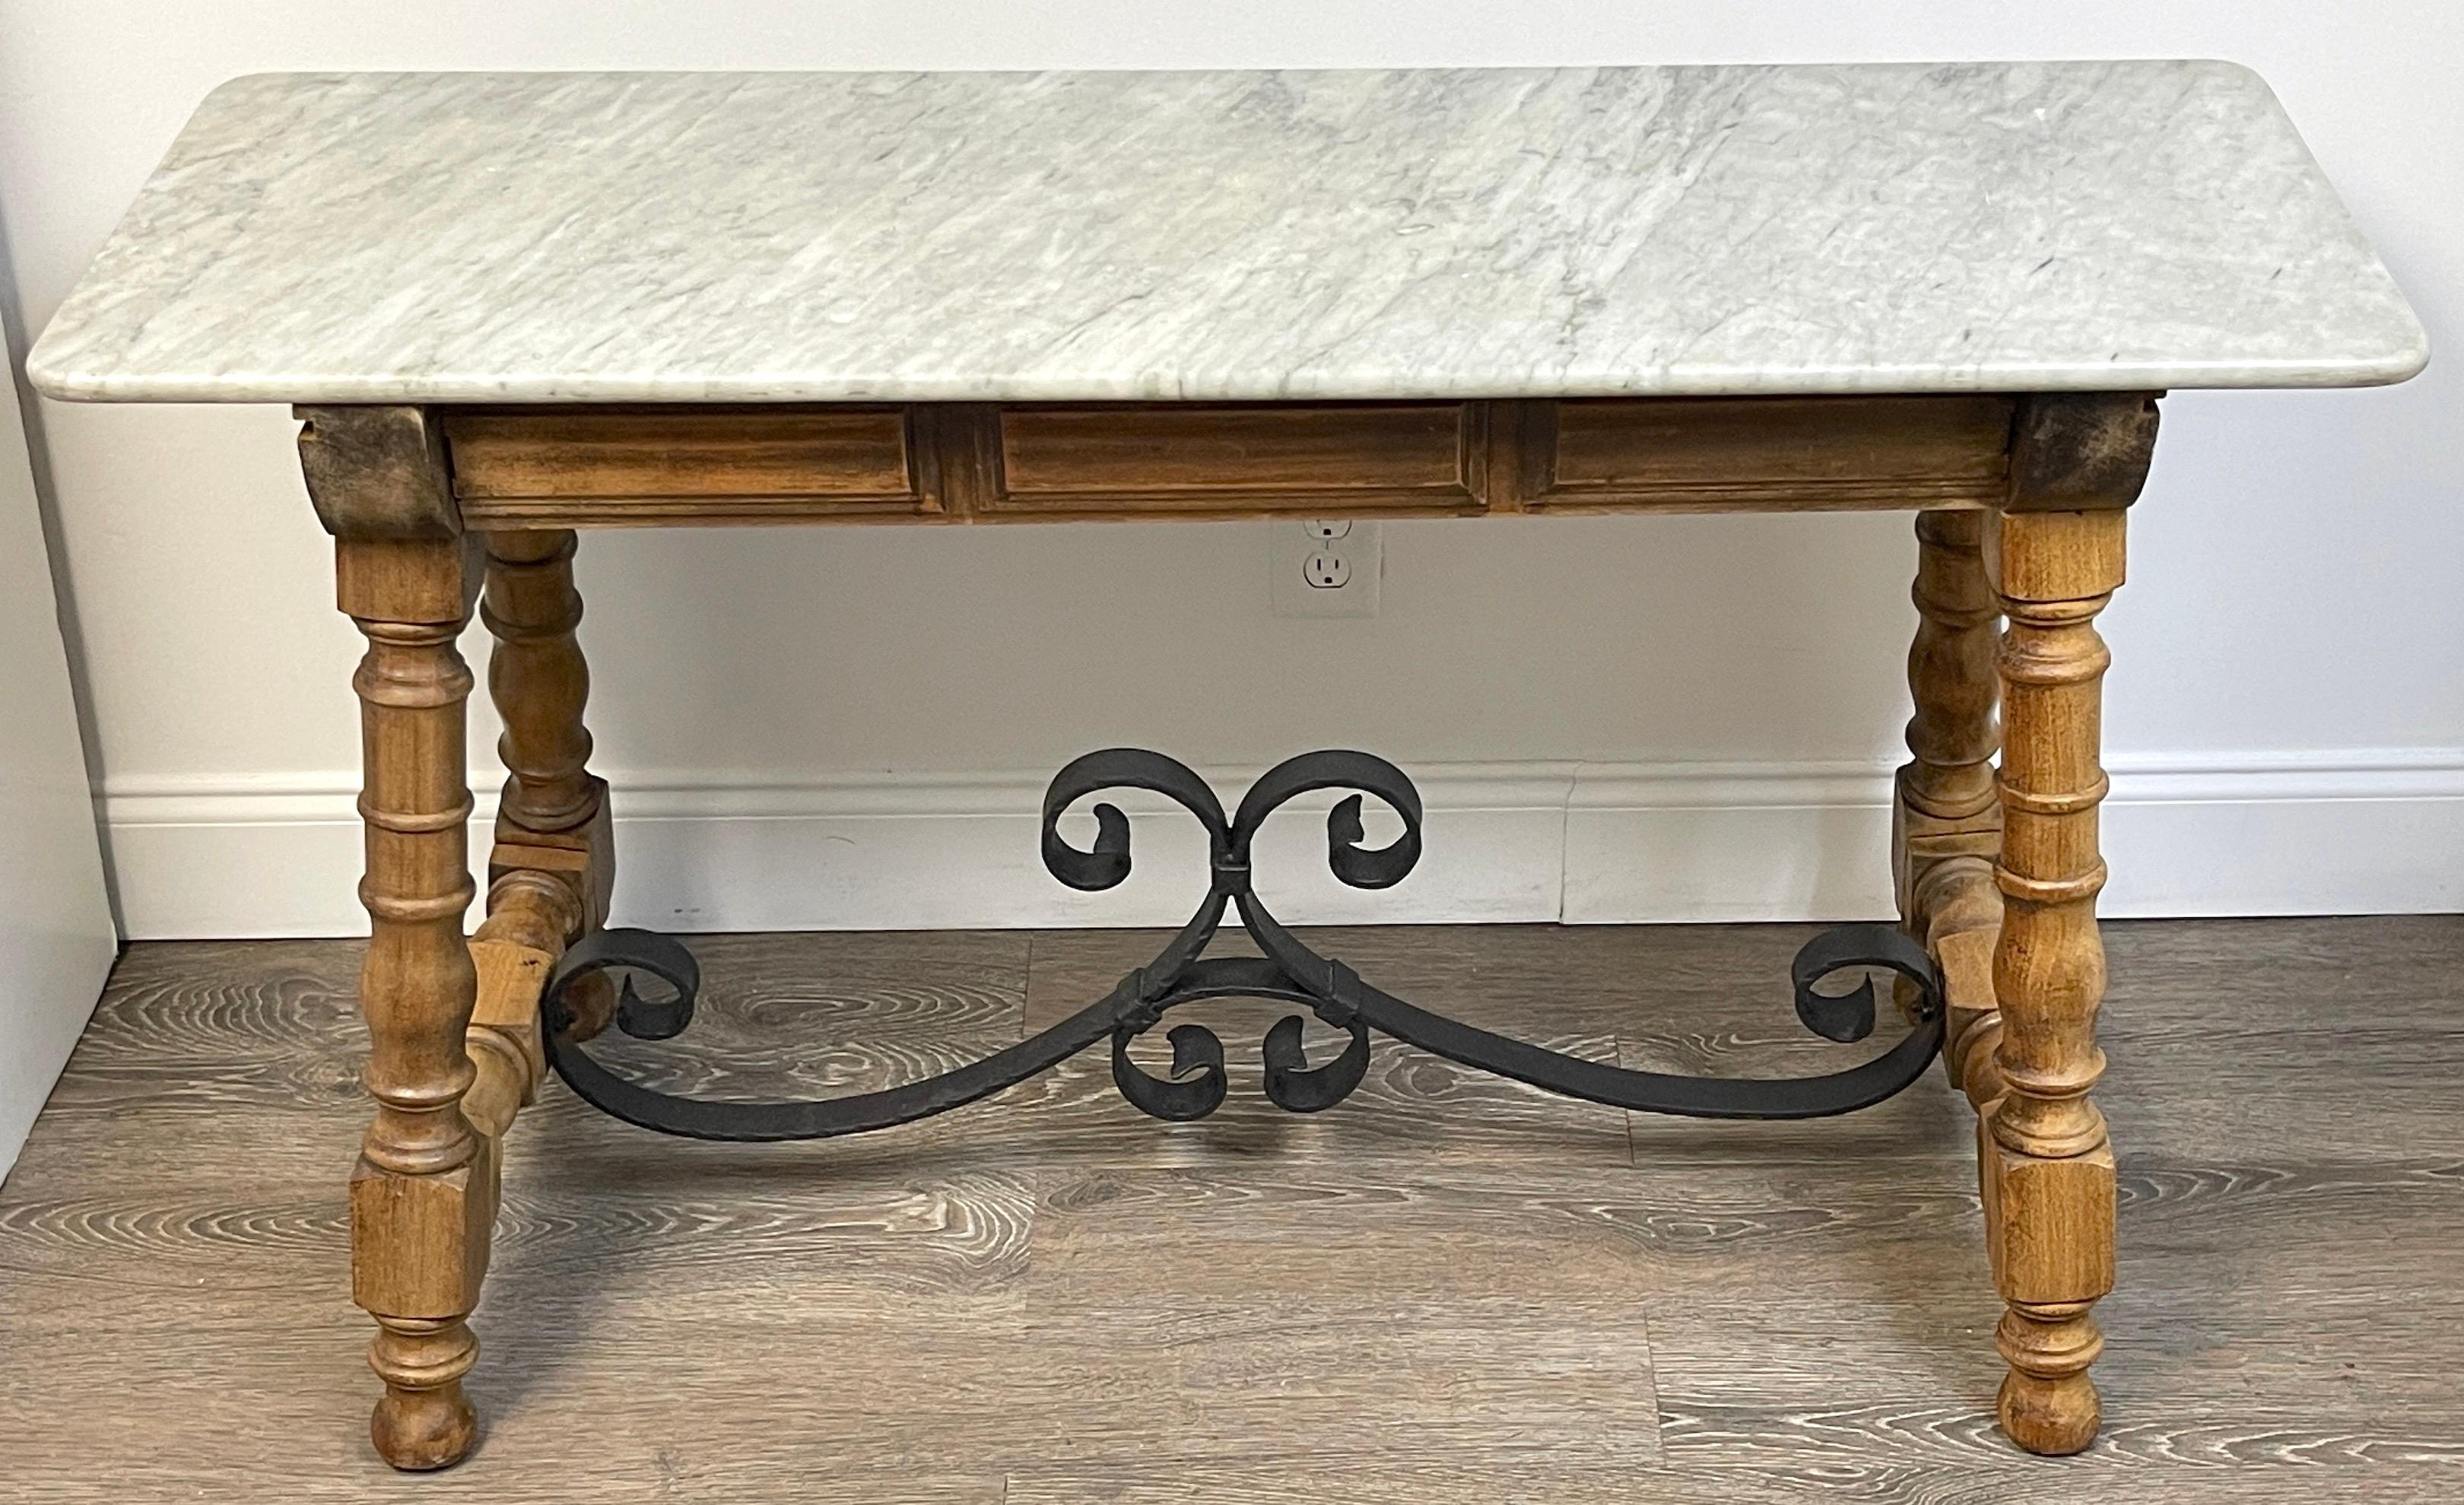 19th Century Country French marble top bleached pine & iron patisserie console /table
France, Circa 1880s
A  rustic of 19th-century French craftsmanship with this authentic Country French patisserie console/table. Made  in France during the 1880s,